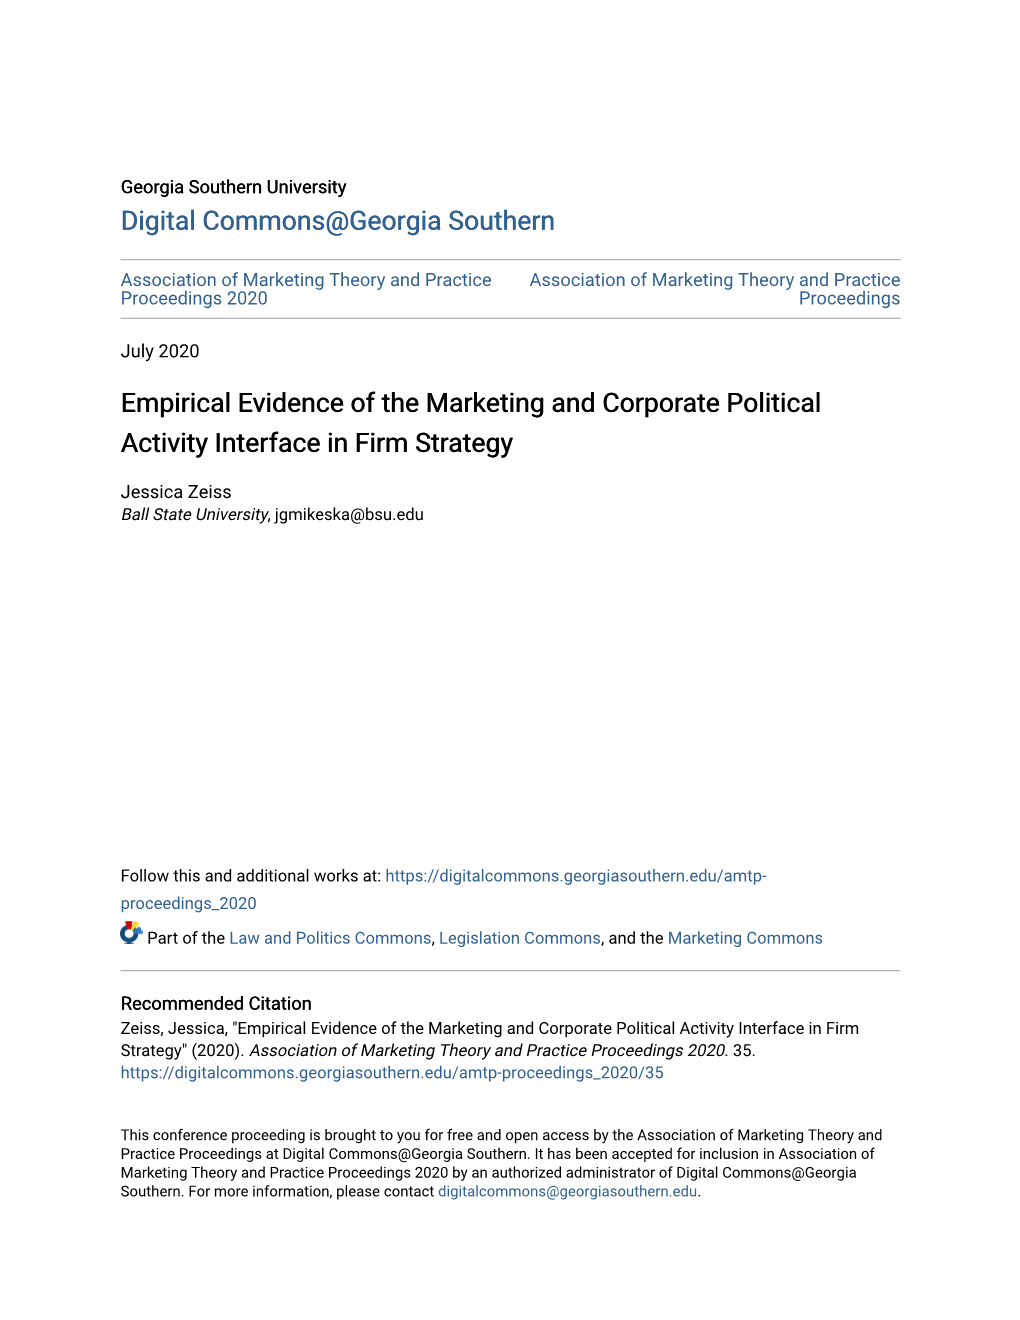 Empirical Evidence of the Marketing and Corporate Political Activity Interface in Firm Strategy